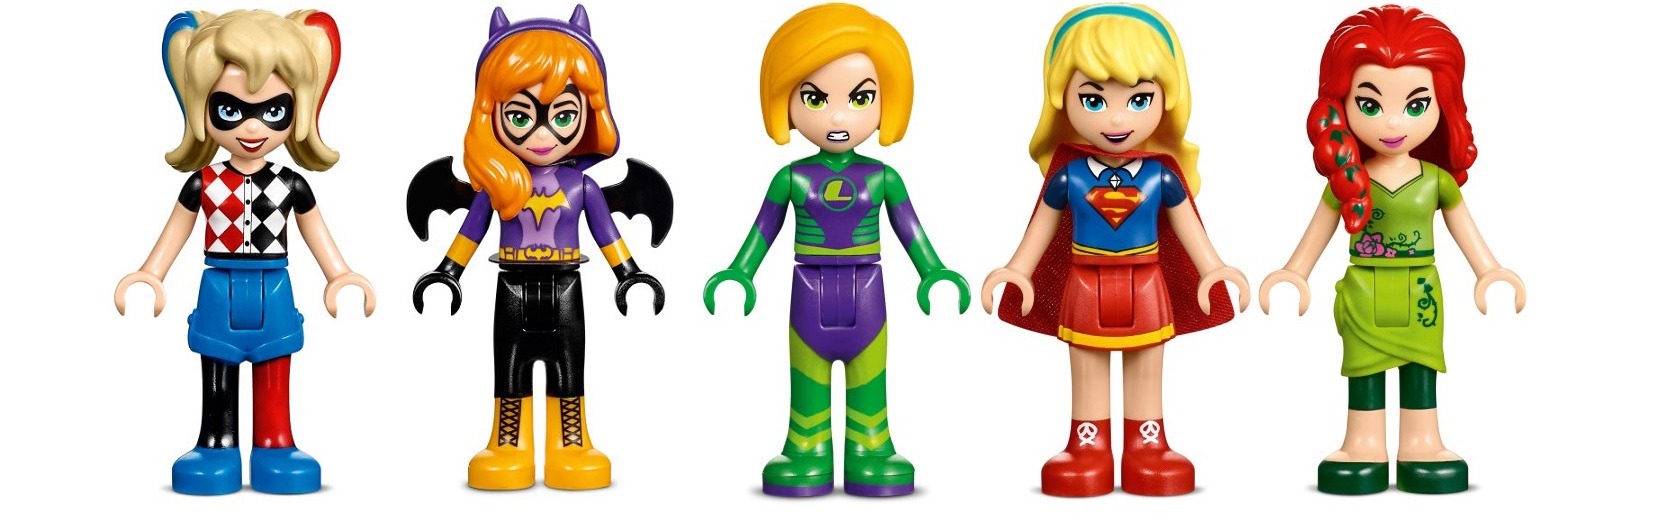 LEGO DC SUPER HEROES GIRLS new various packs available choose the one you like 